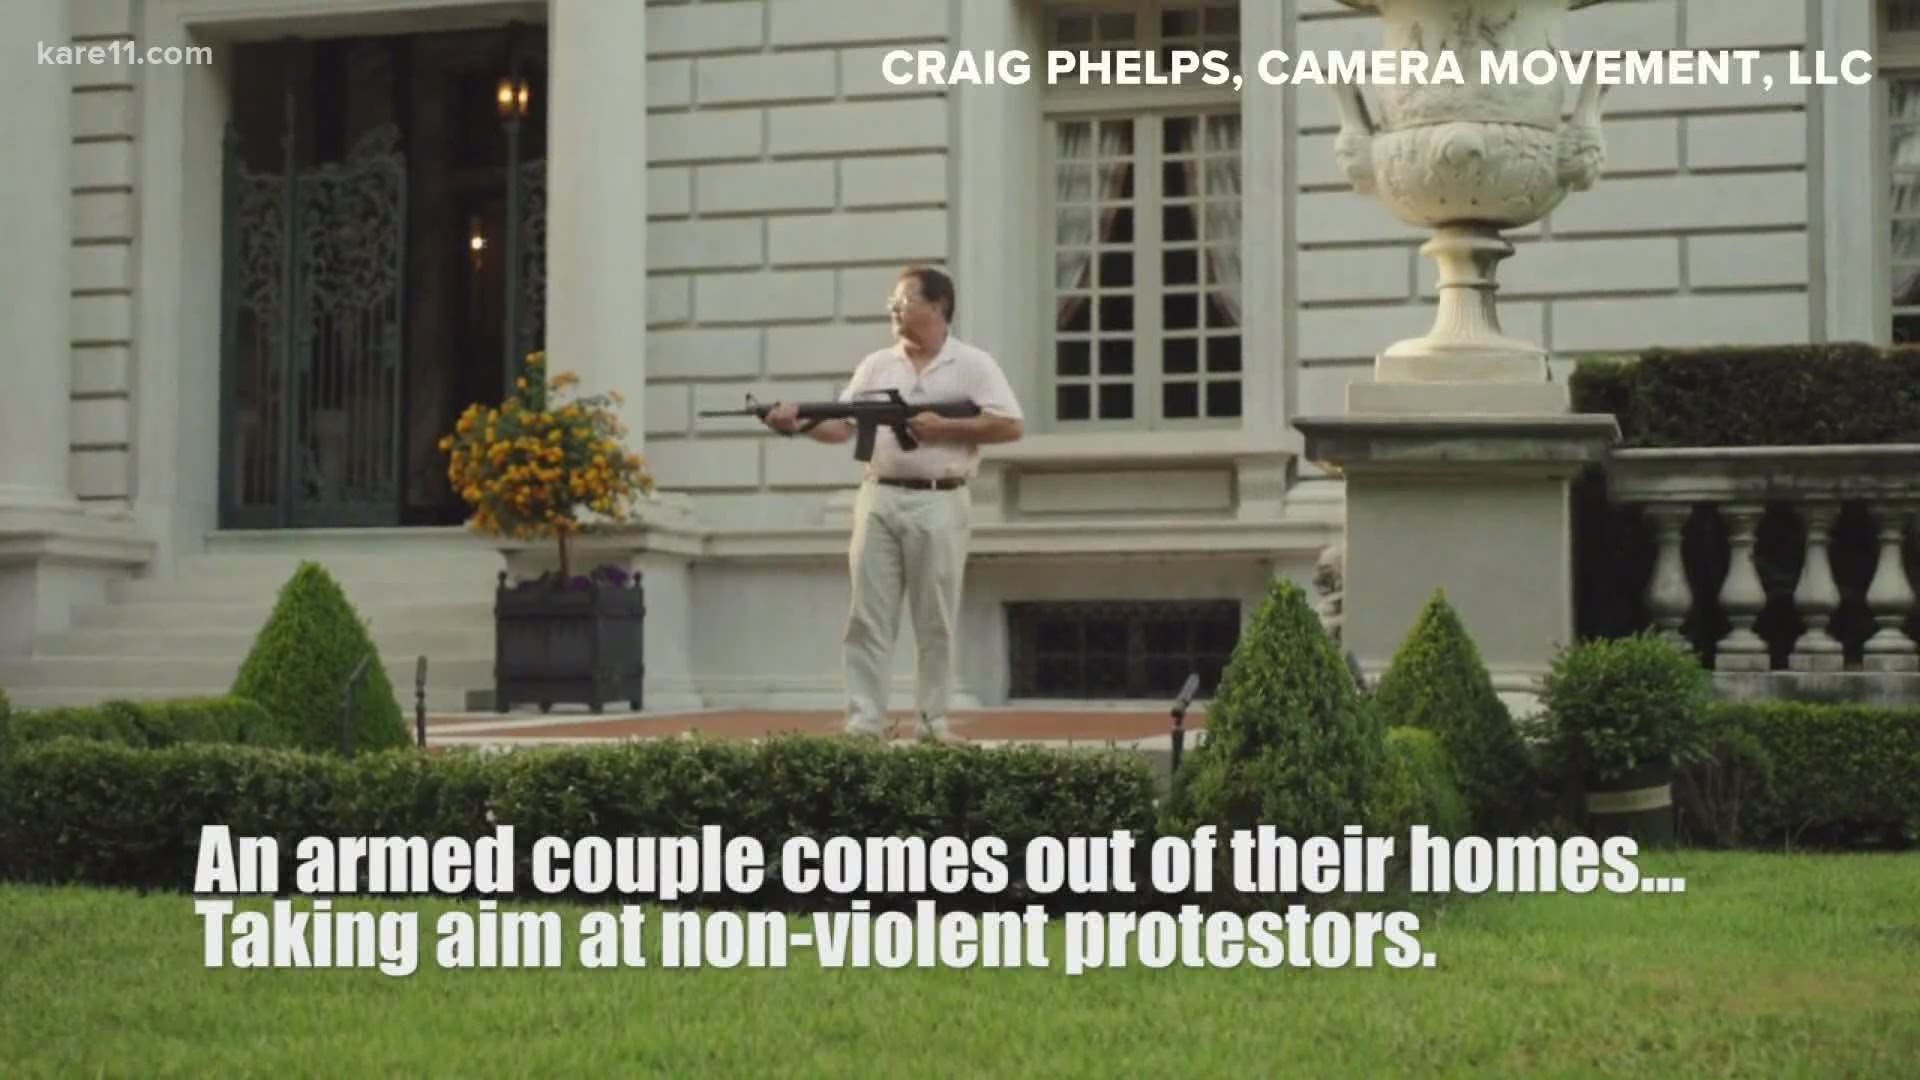 A St. Louis-area man says he and his wife had no choice but to grab guns and defend themselves as protesters approached their home inside a gated community.